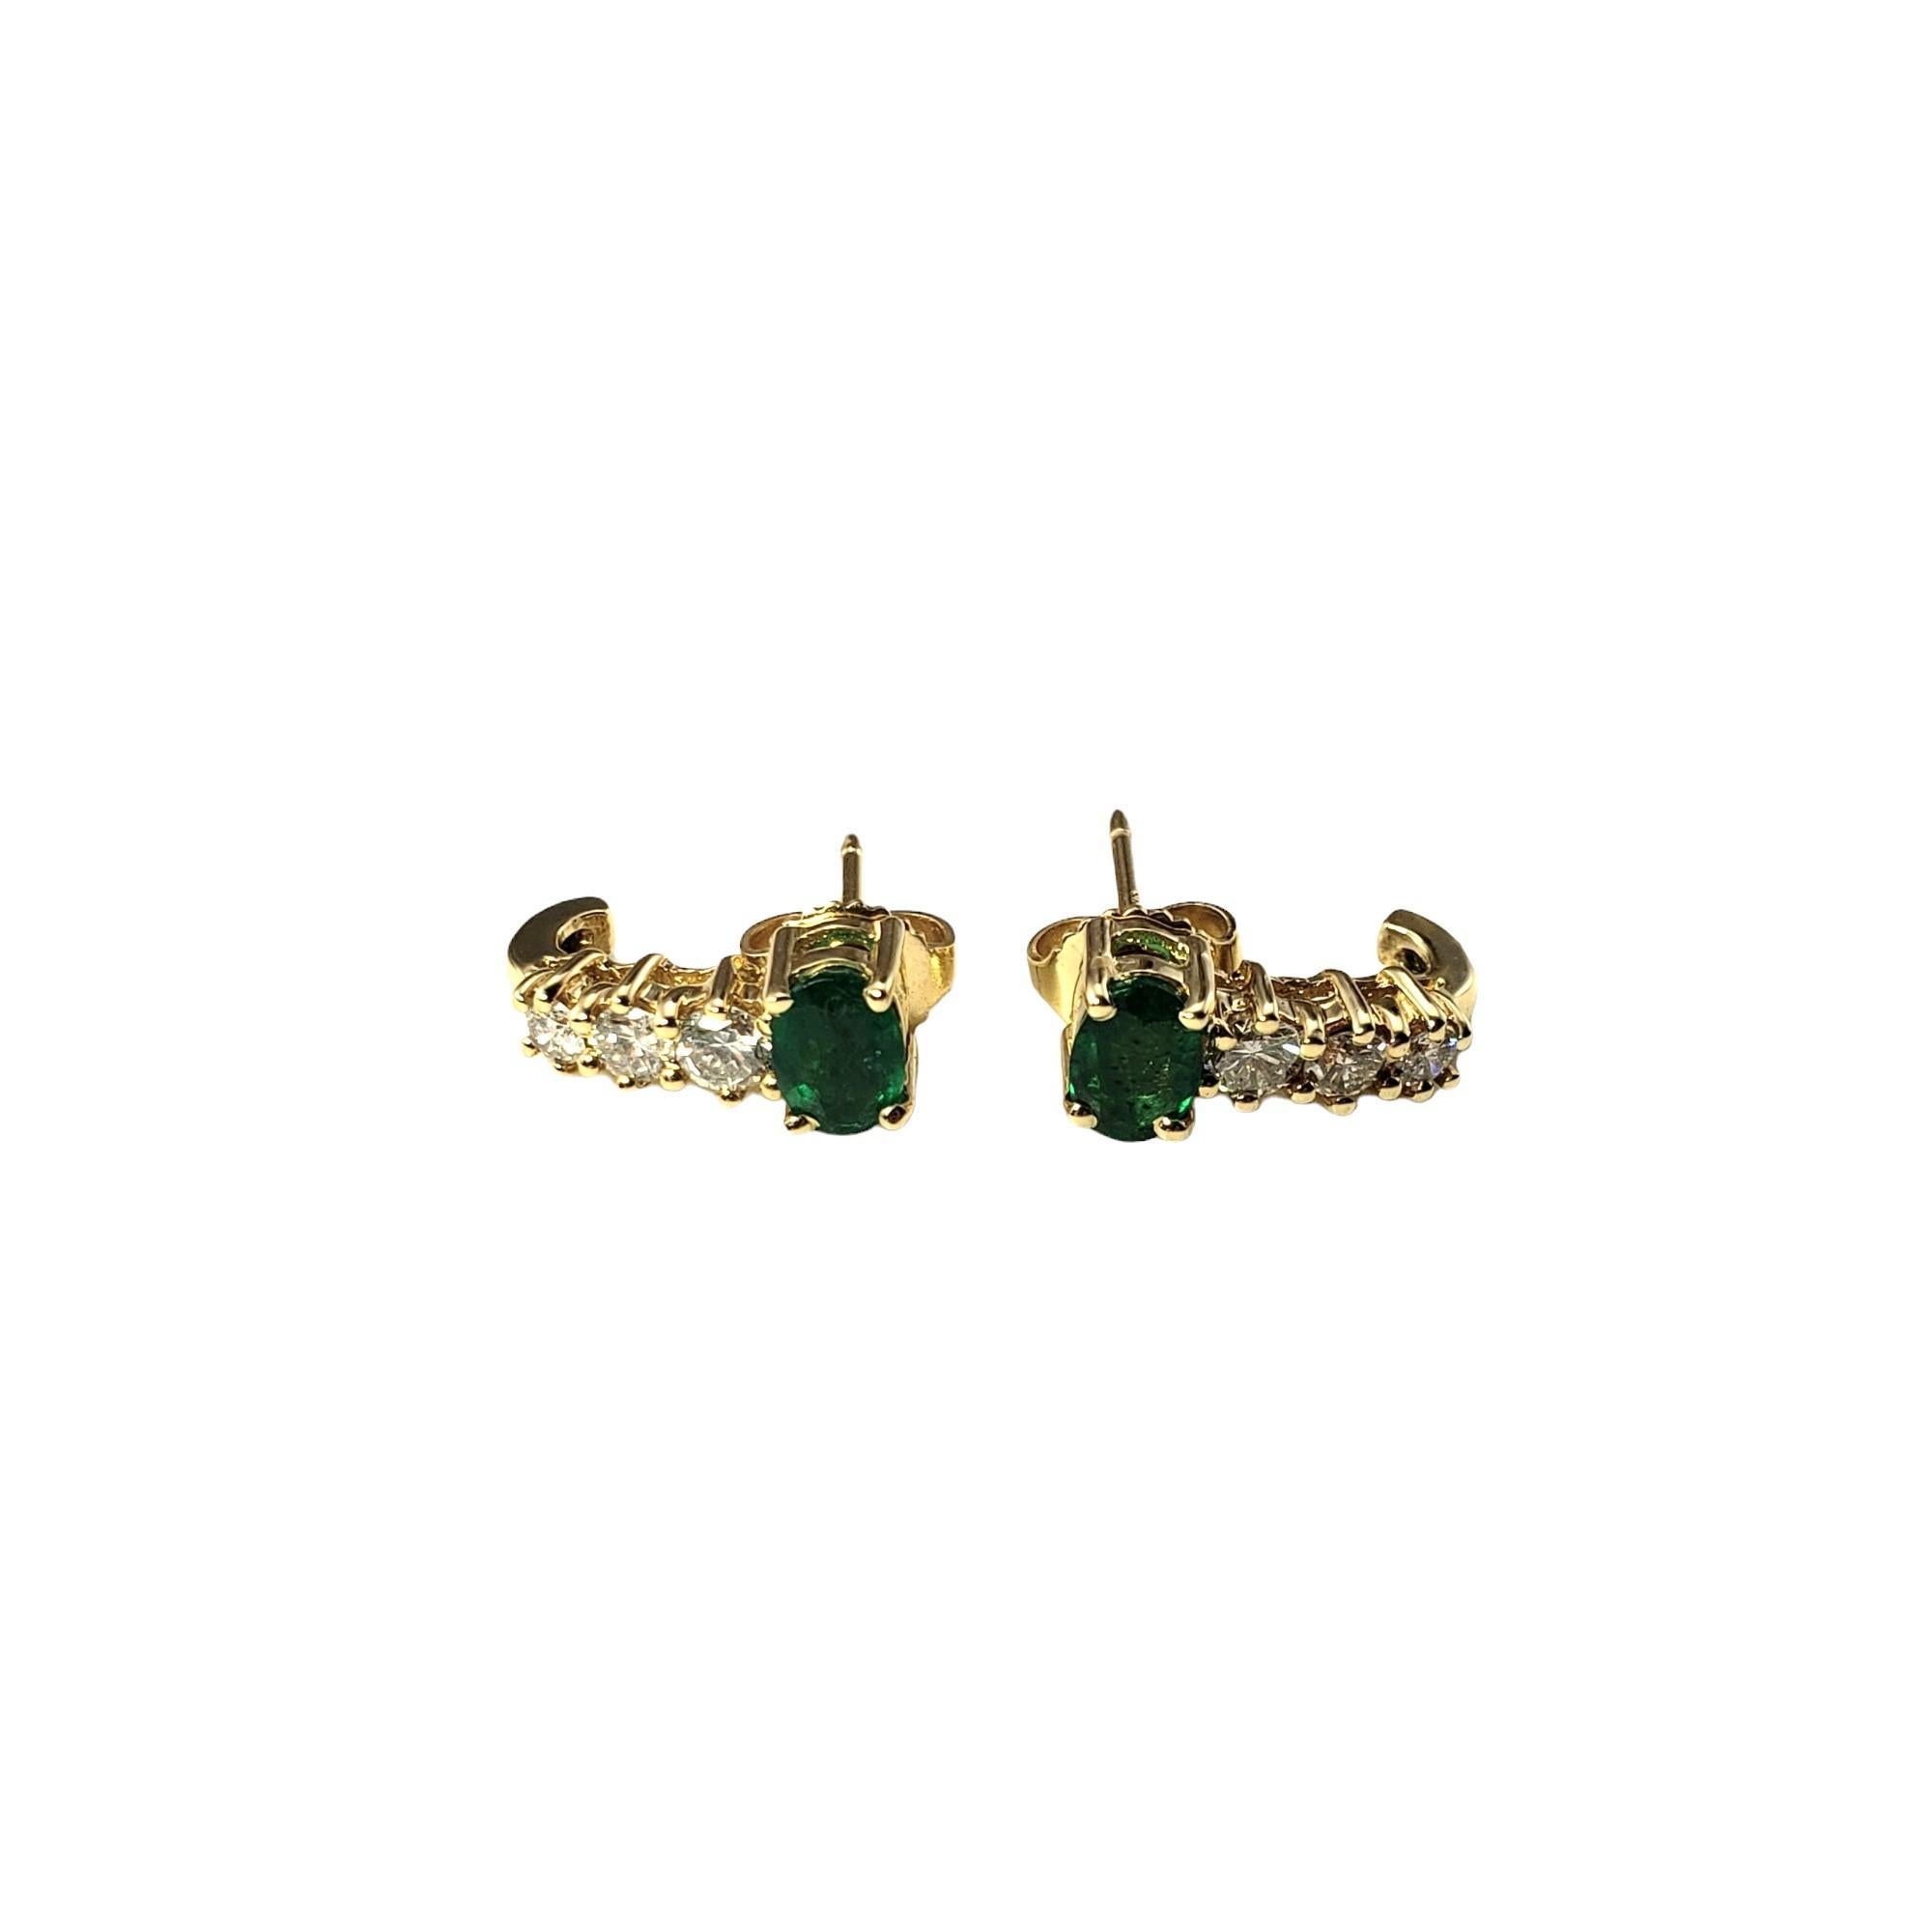 Vintage 14K Yellow Gold Emerald and Diamond Earrings-

These elegant earrings each feature one oval natural emerald (6 mm x 4 mm) and three round brilliant cut diamonds set in classic 14K yellow gold.  Push back closures.

Approximate total diamond